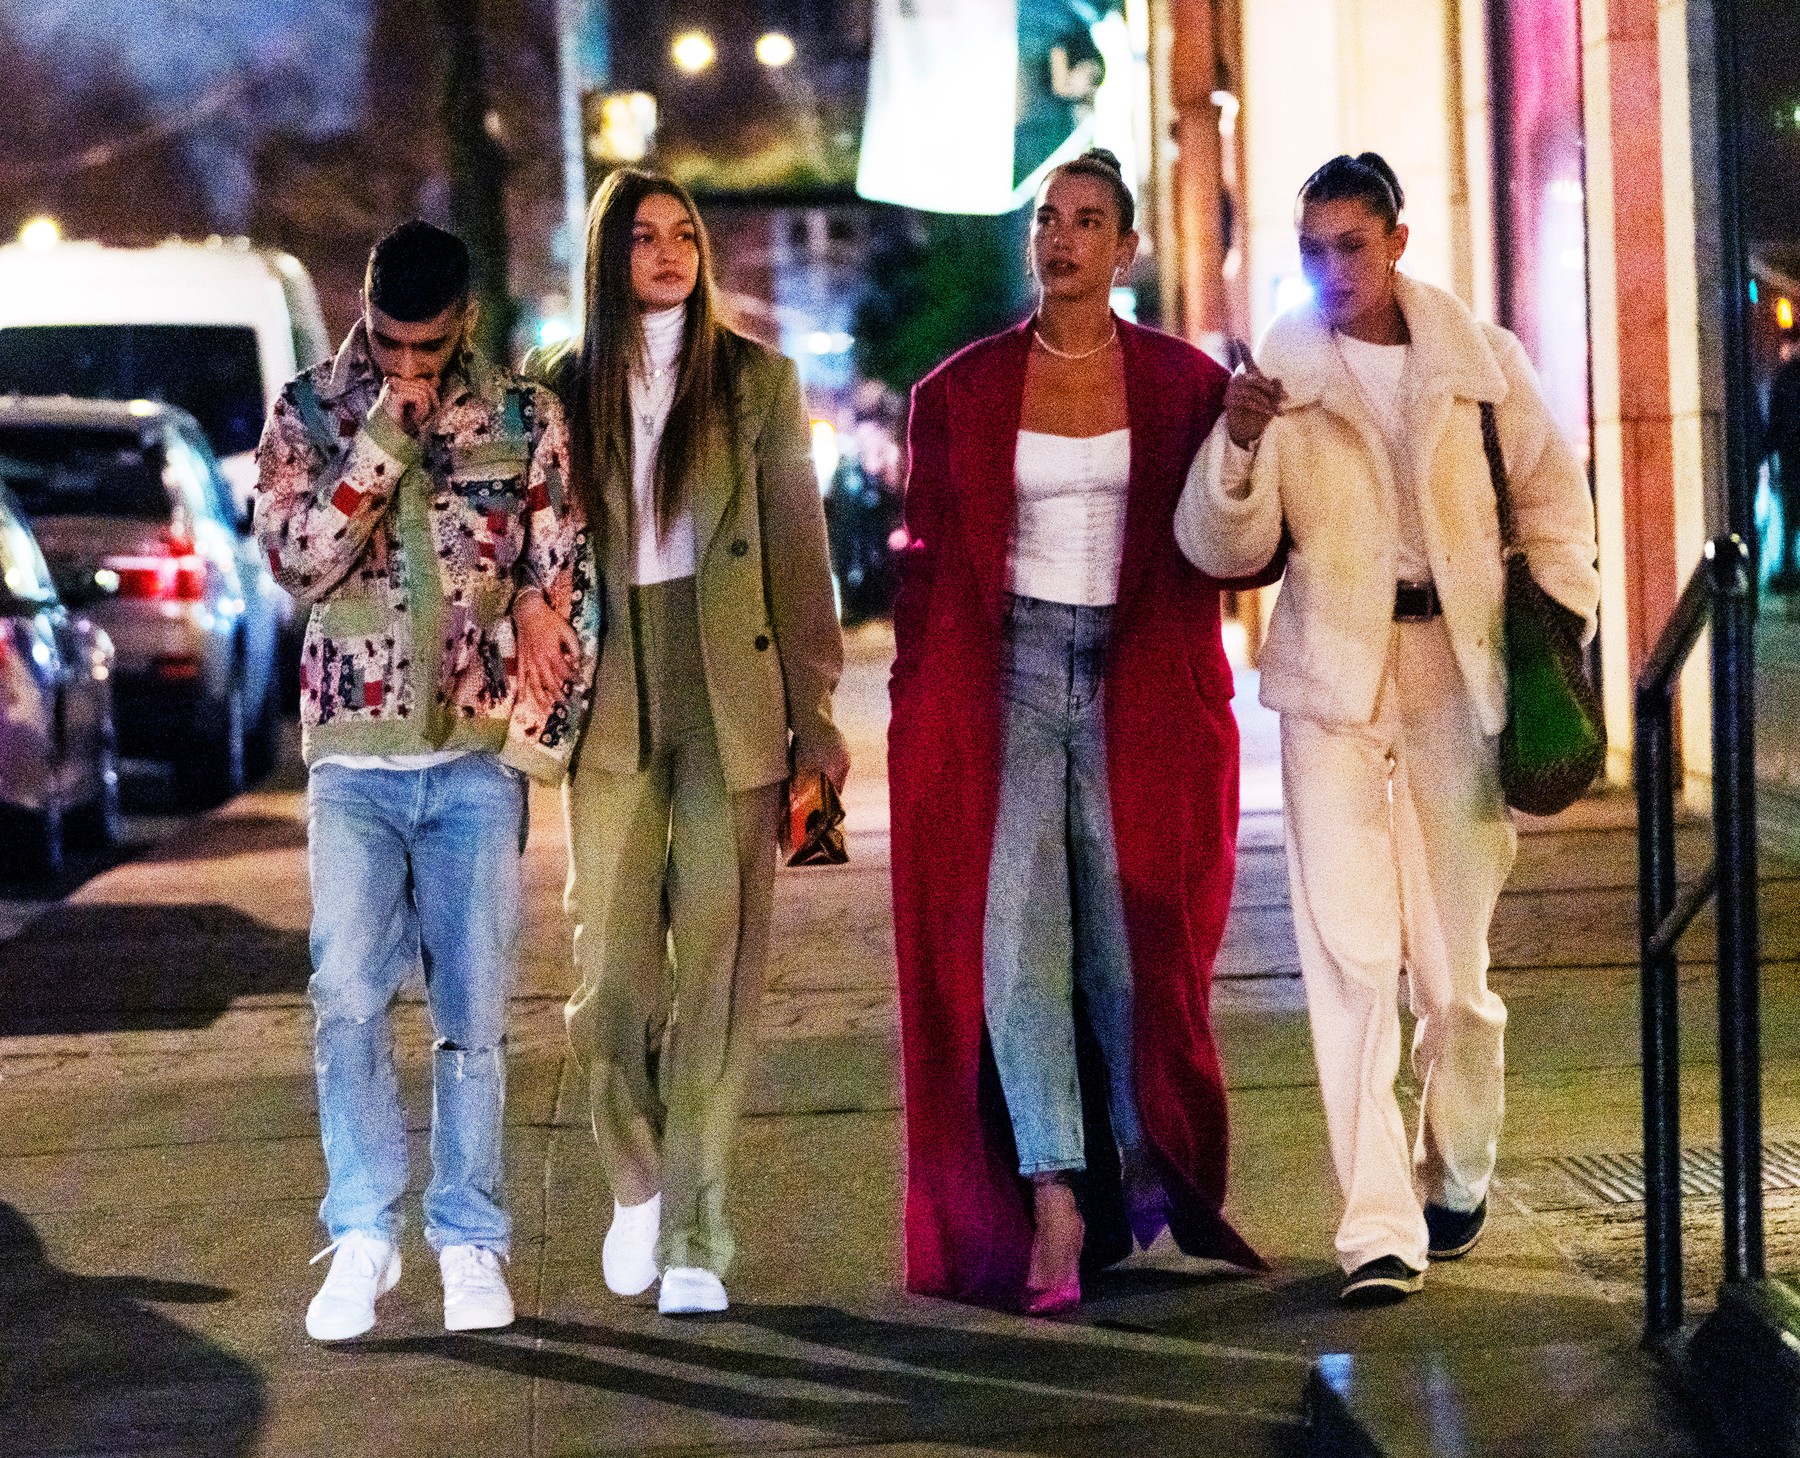 01/11/2020 First shots of Zayn Malik and Gigi Hadid back together again after splitting up last year. The couple reunited to celebrate Yolanda Foster's birthday and were joined by Dua Lipa and Bella Hadid, Image: 492305195, License: Rights-managed, Restrictions: NO usage without agreed price and terms. Please contact sales@theimagedirect.com, Model Release: no, Credit line: TheImageDirect.com / The Image Direct / Profimedia